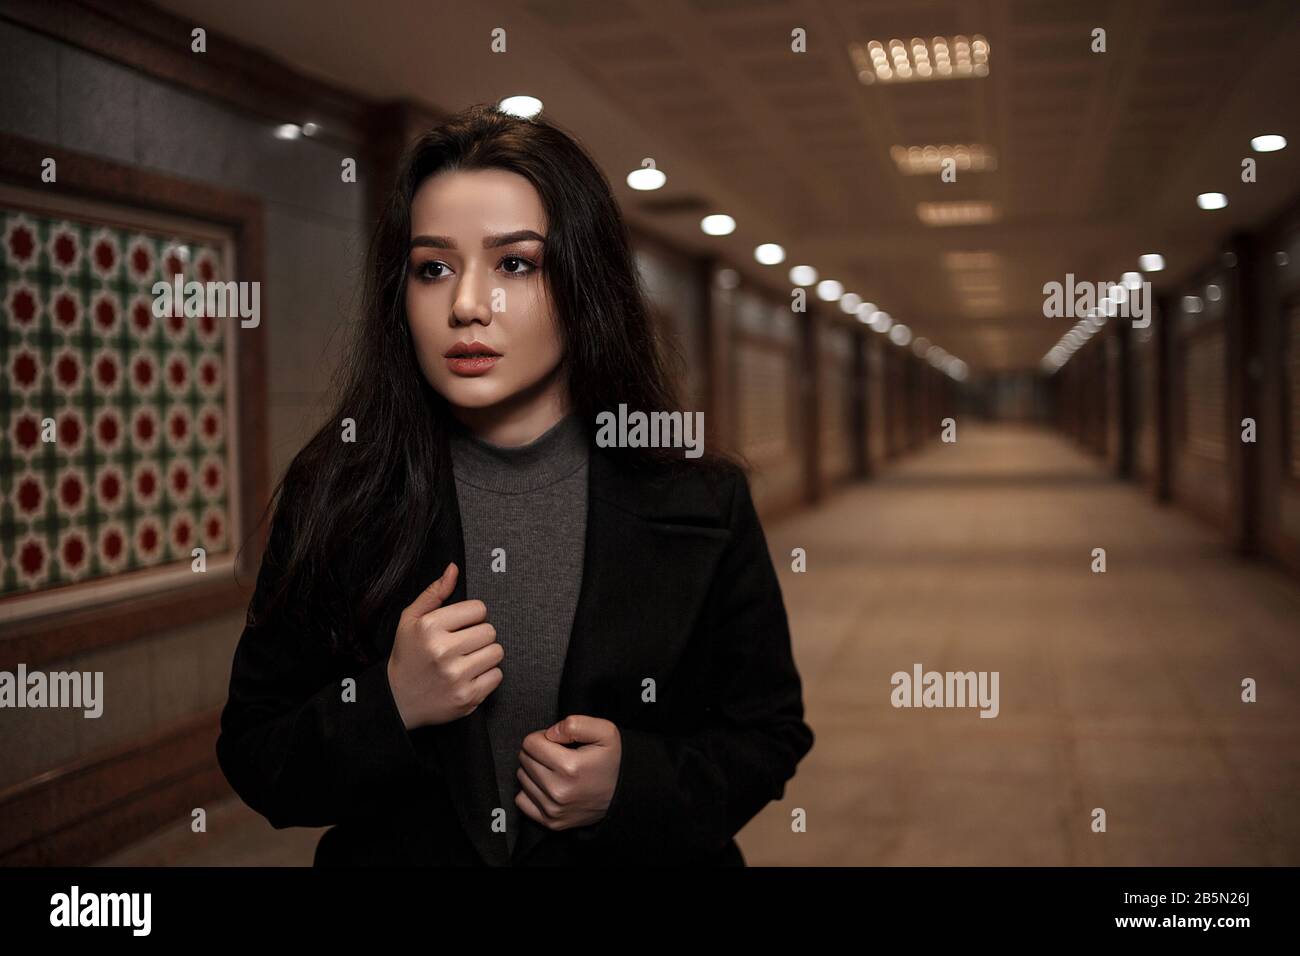 a young beautiful woman walks through an underground passage at night, looking back with fear Stock Photo